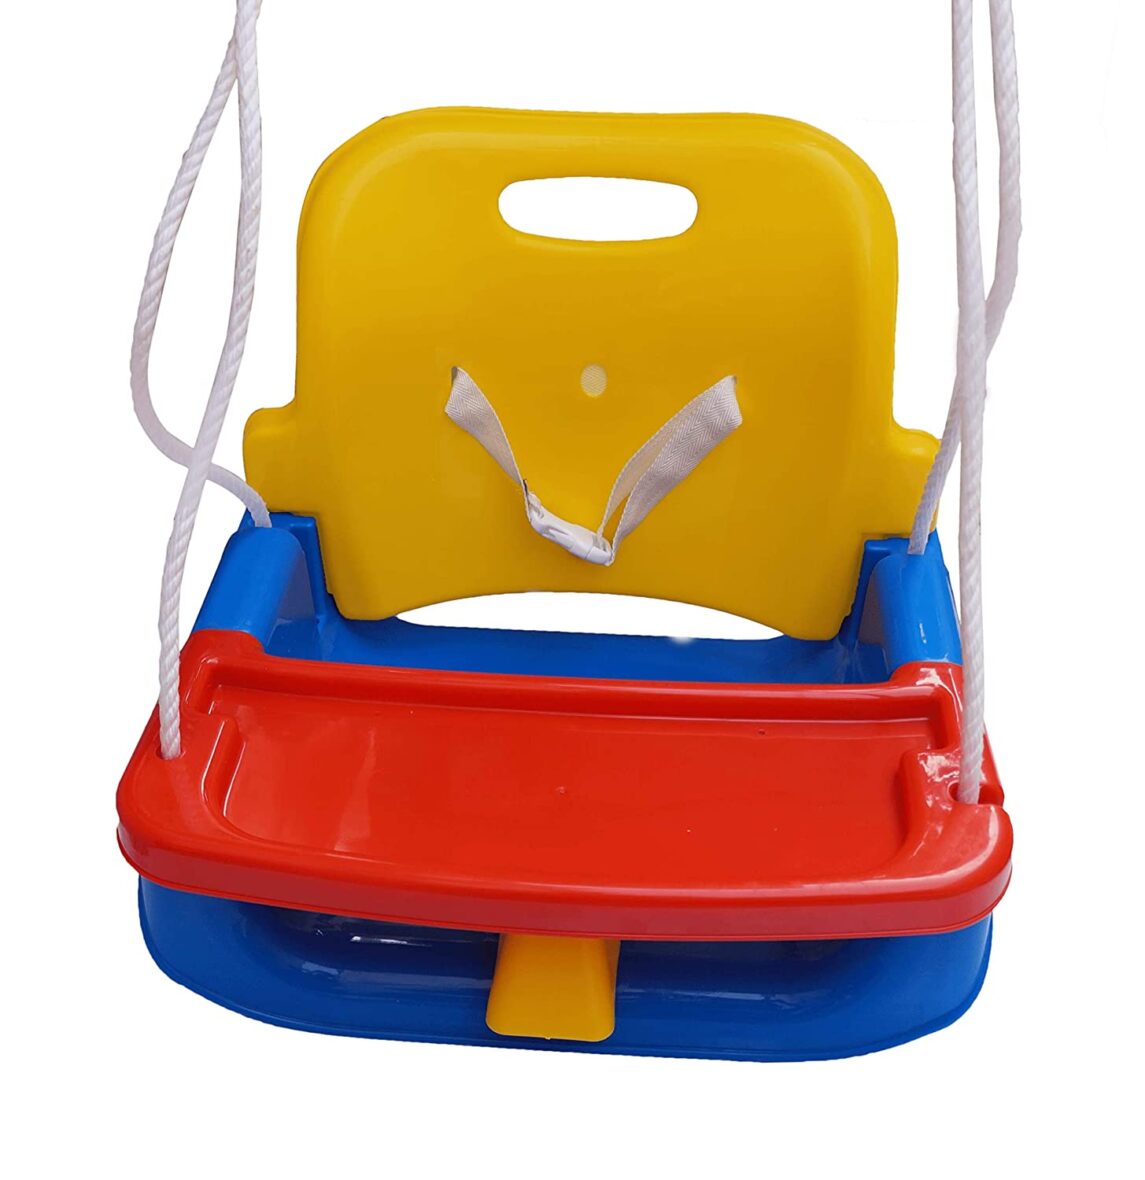 Swing for Kids – Baby Swing with Tray – for Indoor and Outdoor- Red and Blue Color – for Boys and Girls of Age 6 Months +